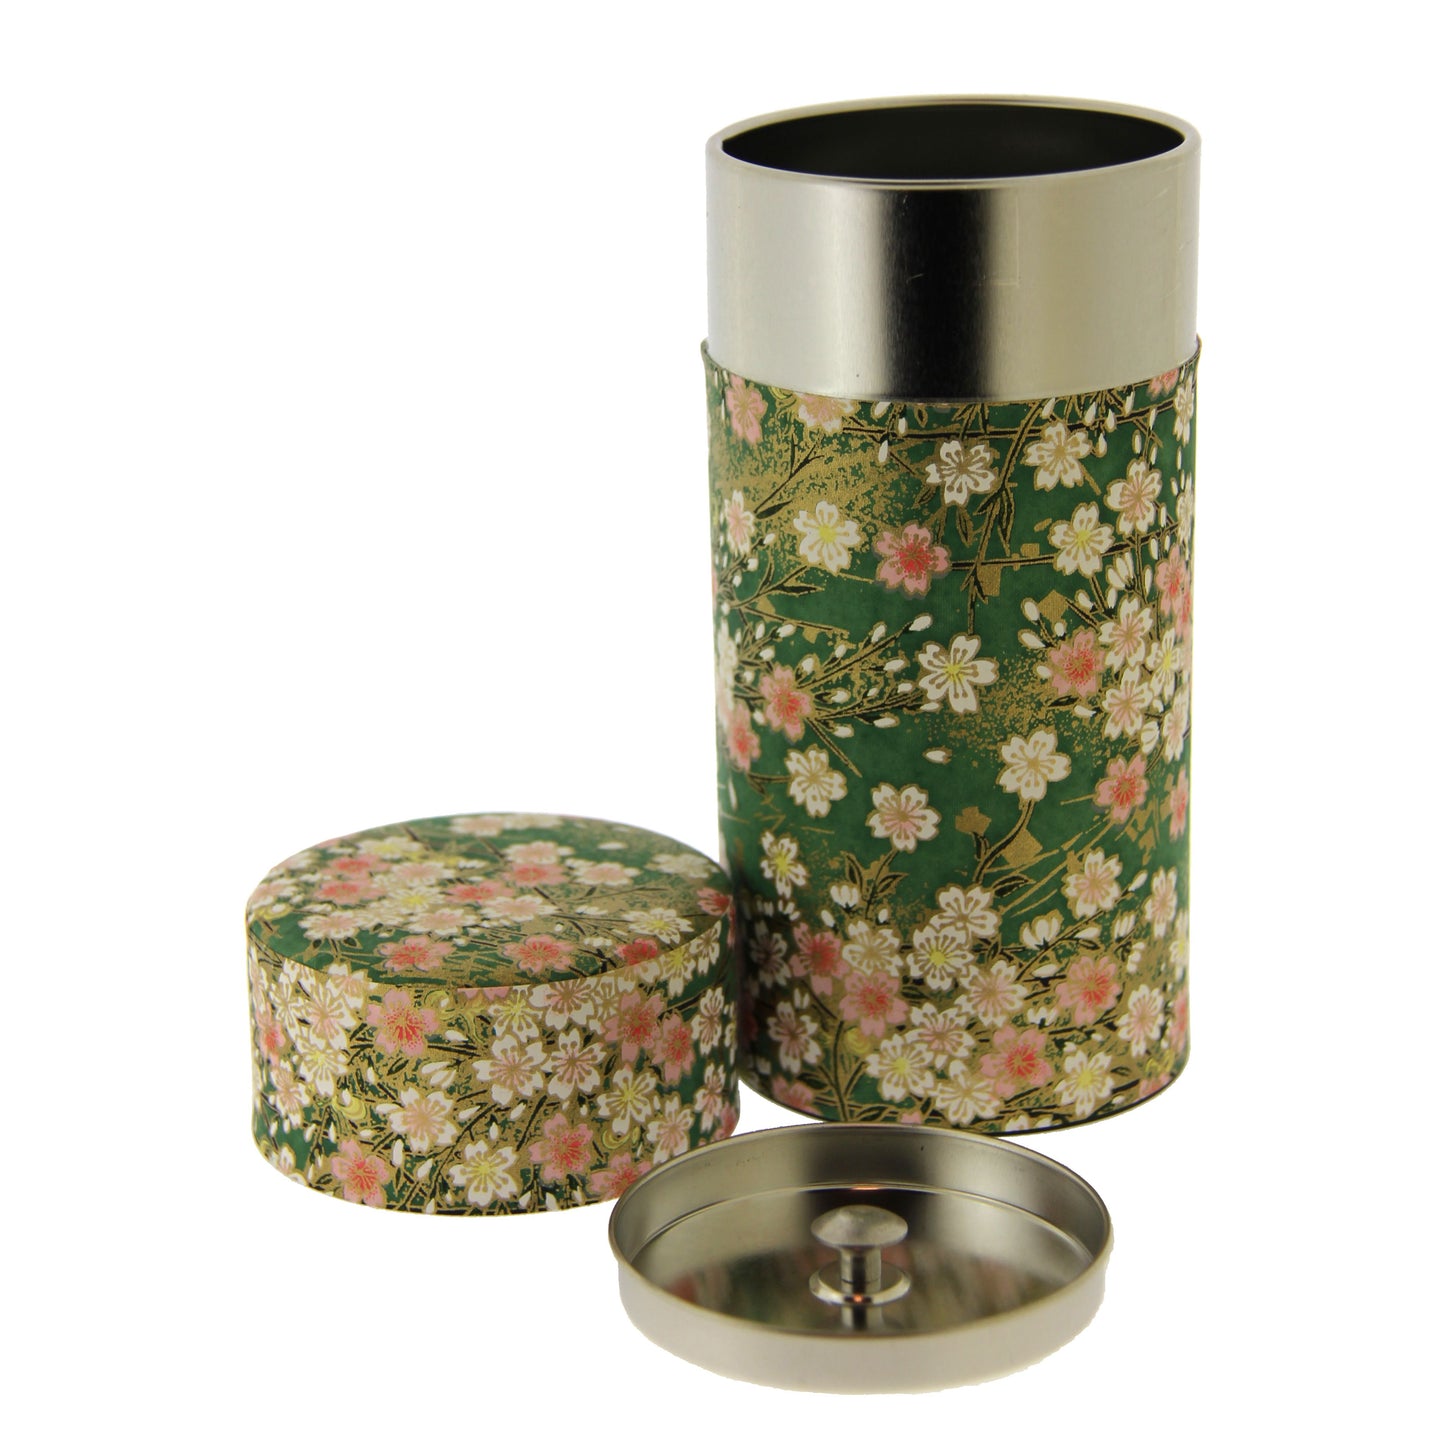 Japanese metal tea tin caddy with beautiful soft green washi tape around it which has pink and white cherry blossoms all over it